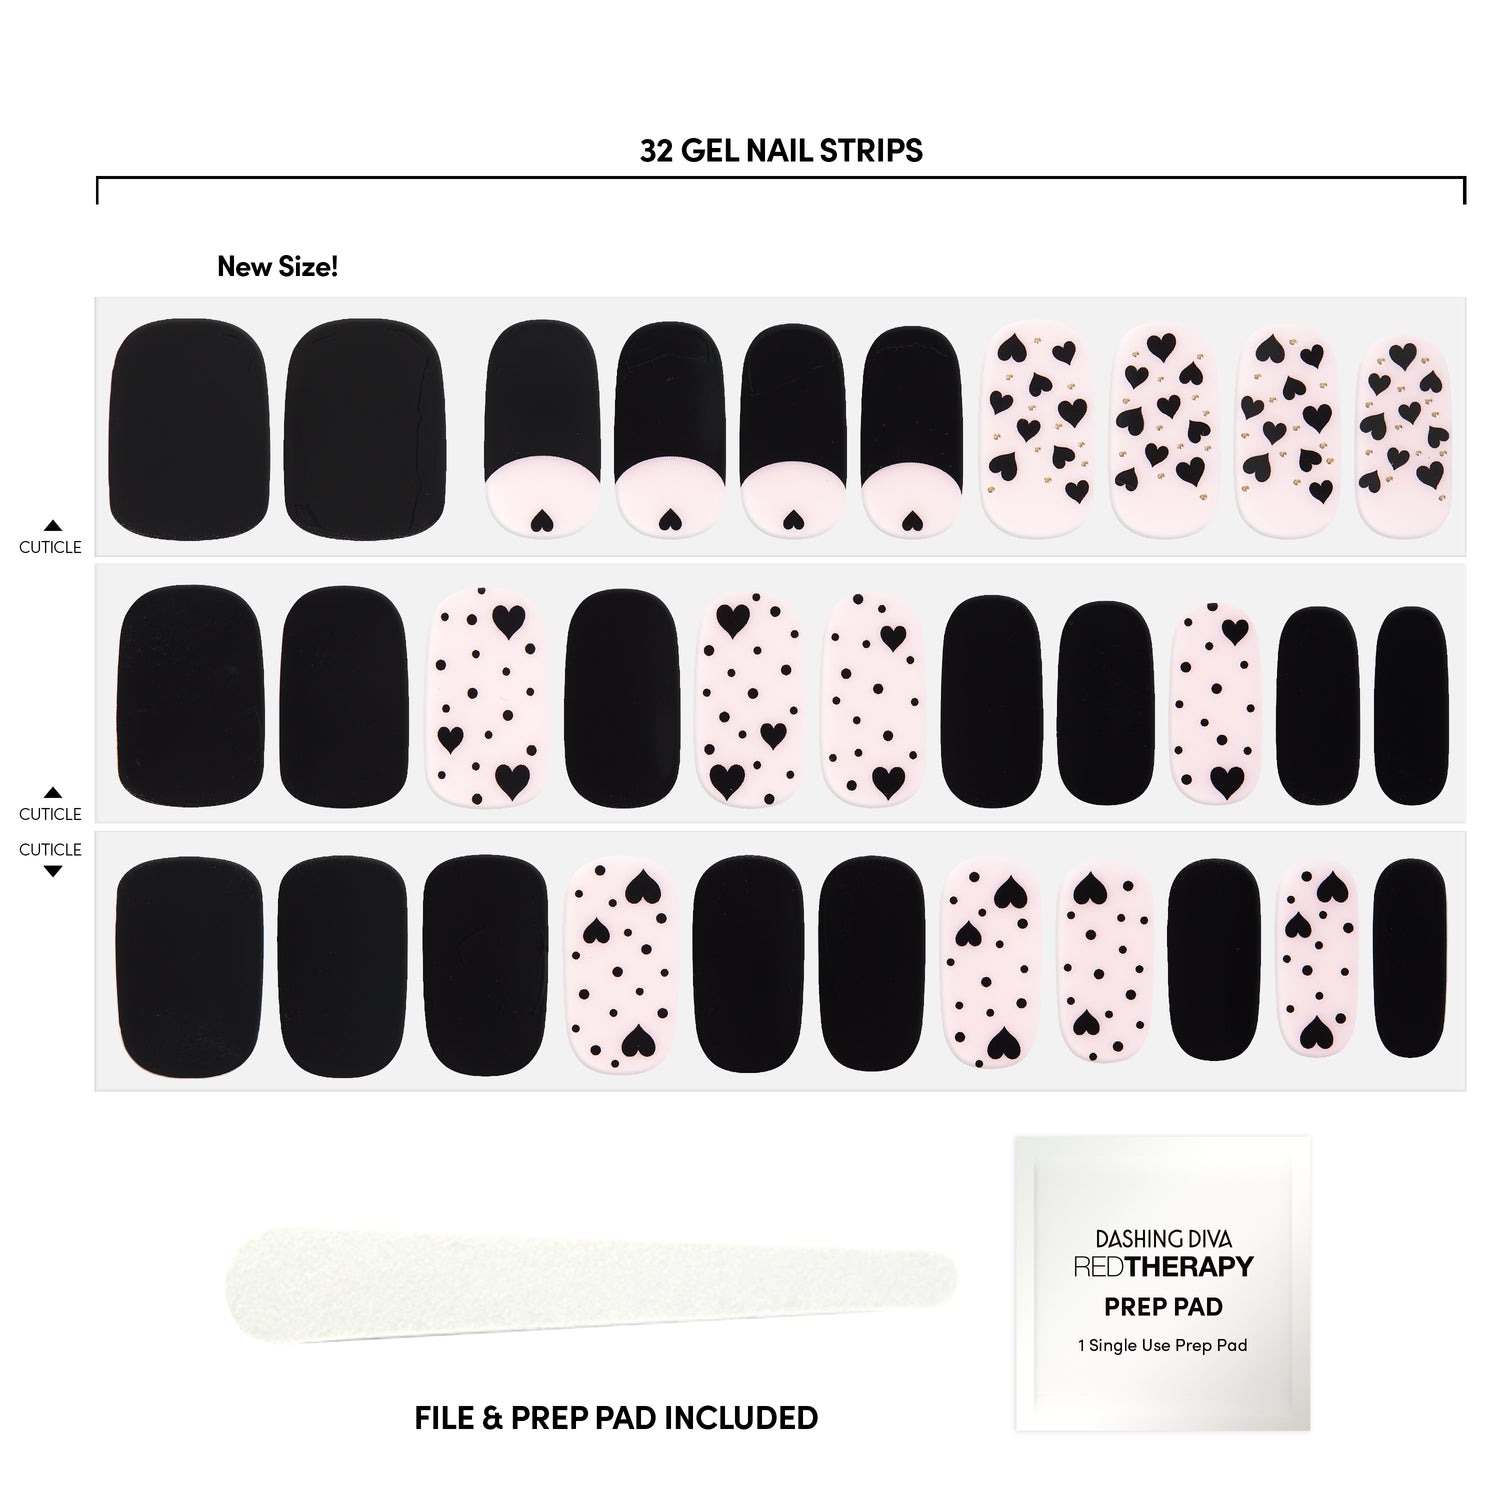 pink and black nail strips featuring a black French tip, fluttery hearts, and 3D gold detailing 